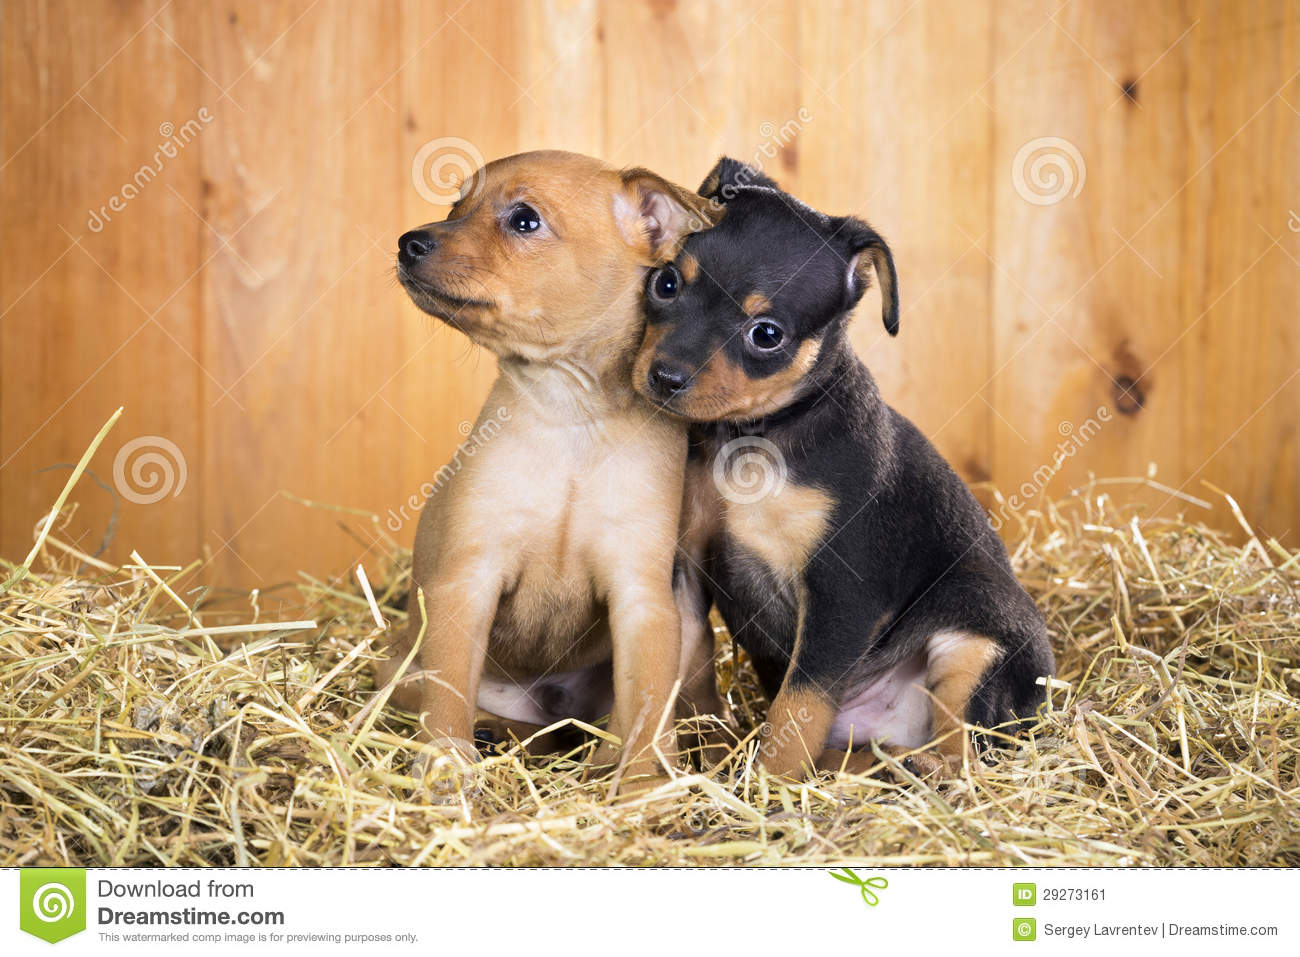 Russian Toy Puppies: Russian Stock Two Russian Toy Terrier Puppies Breed